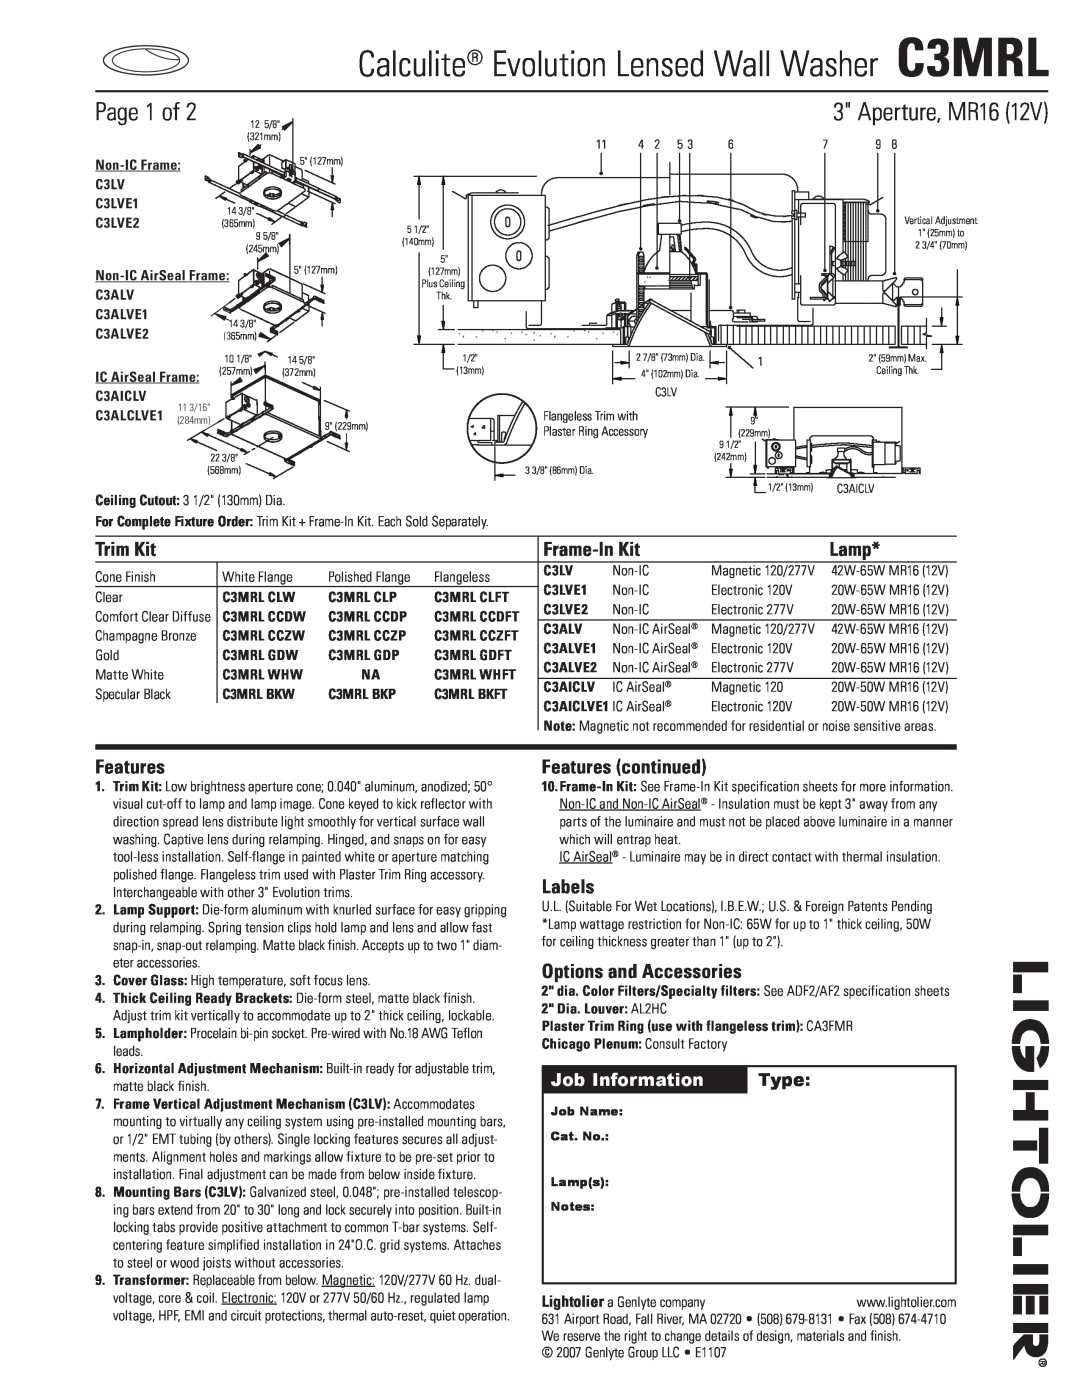 Lightolier specifications Calculite Evolution Lensed Wall Washer C3MRL, Page of, Aperture, MR16, Job Information, Type 